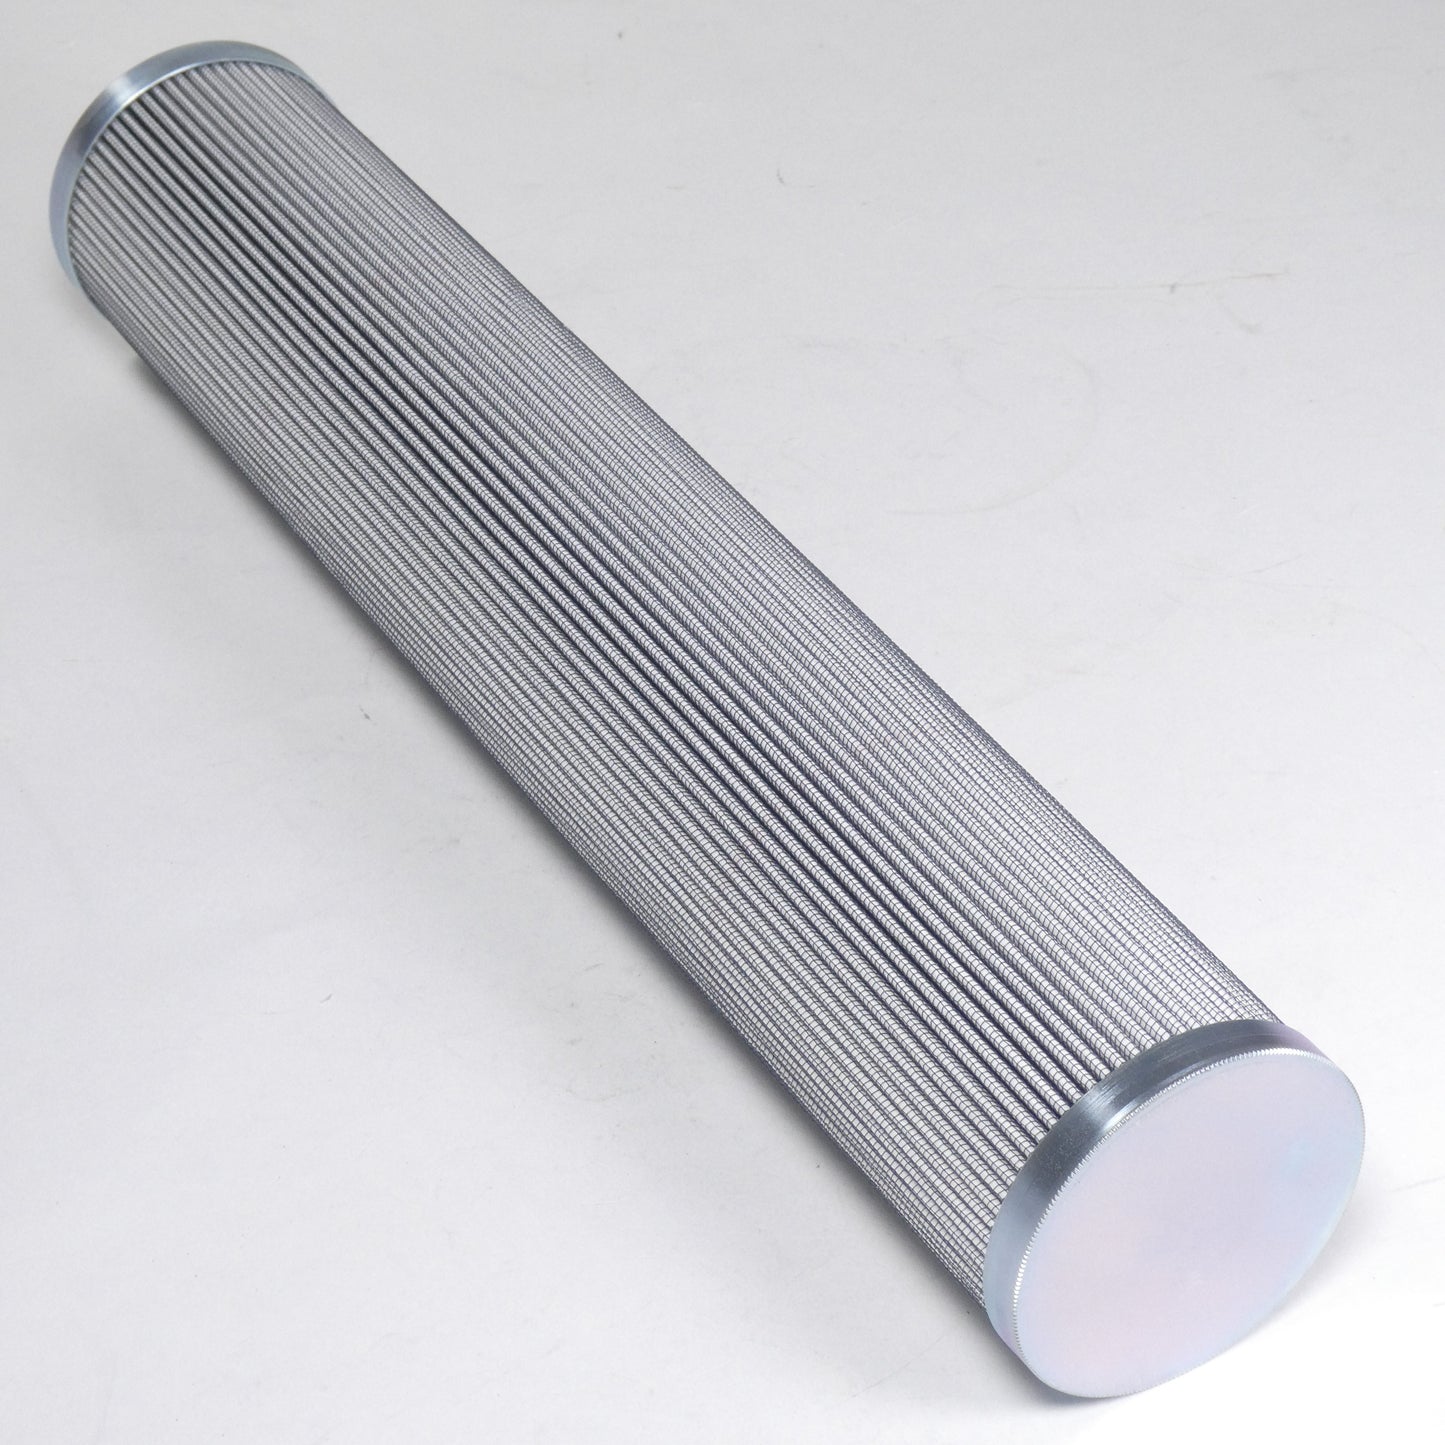 Hydrafil Replacement Filter Element for Filtersoft H9616MAB-A2